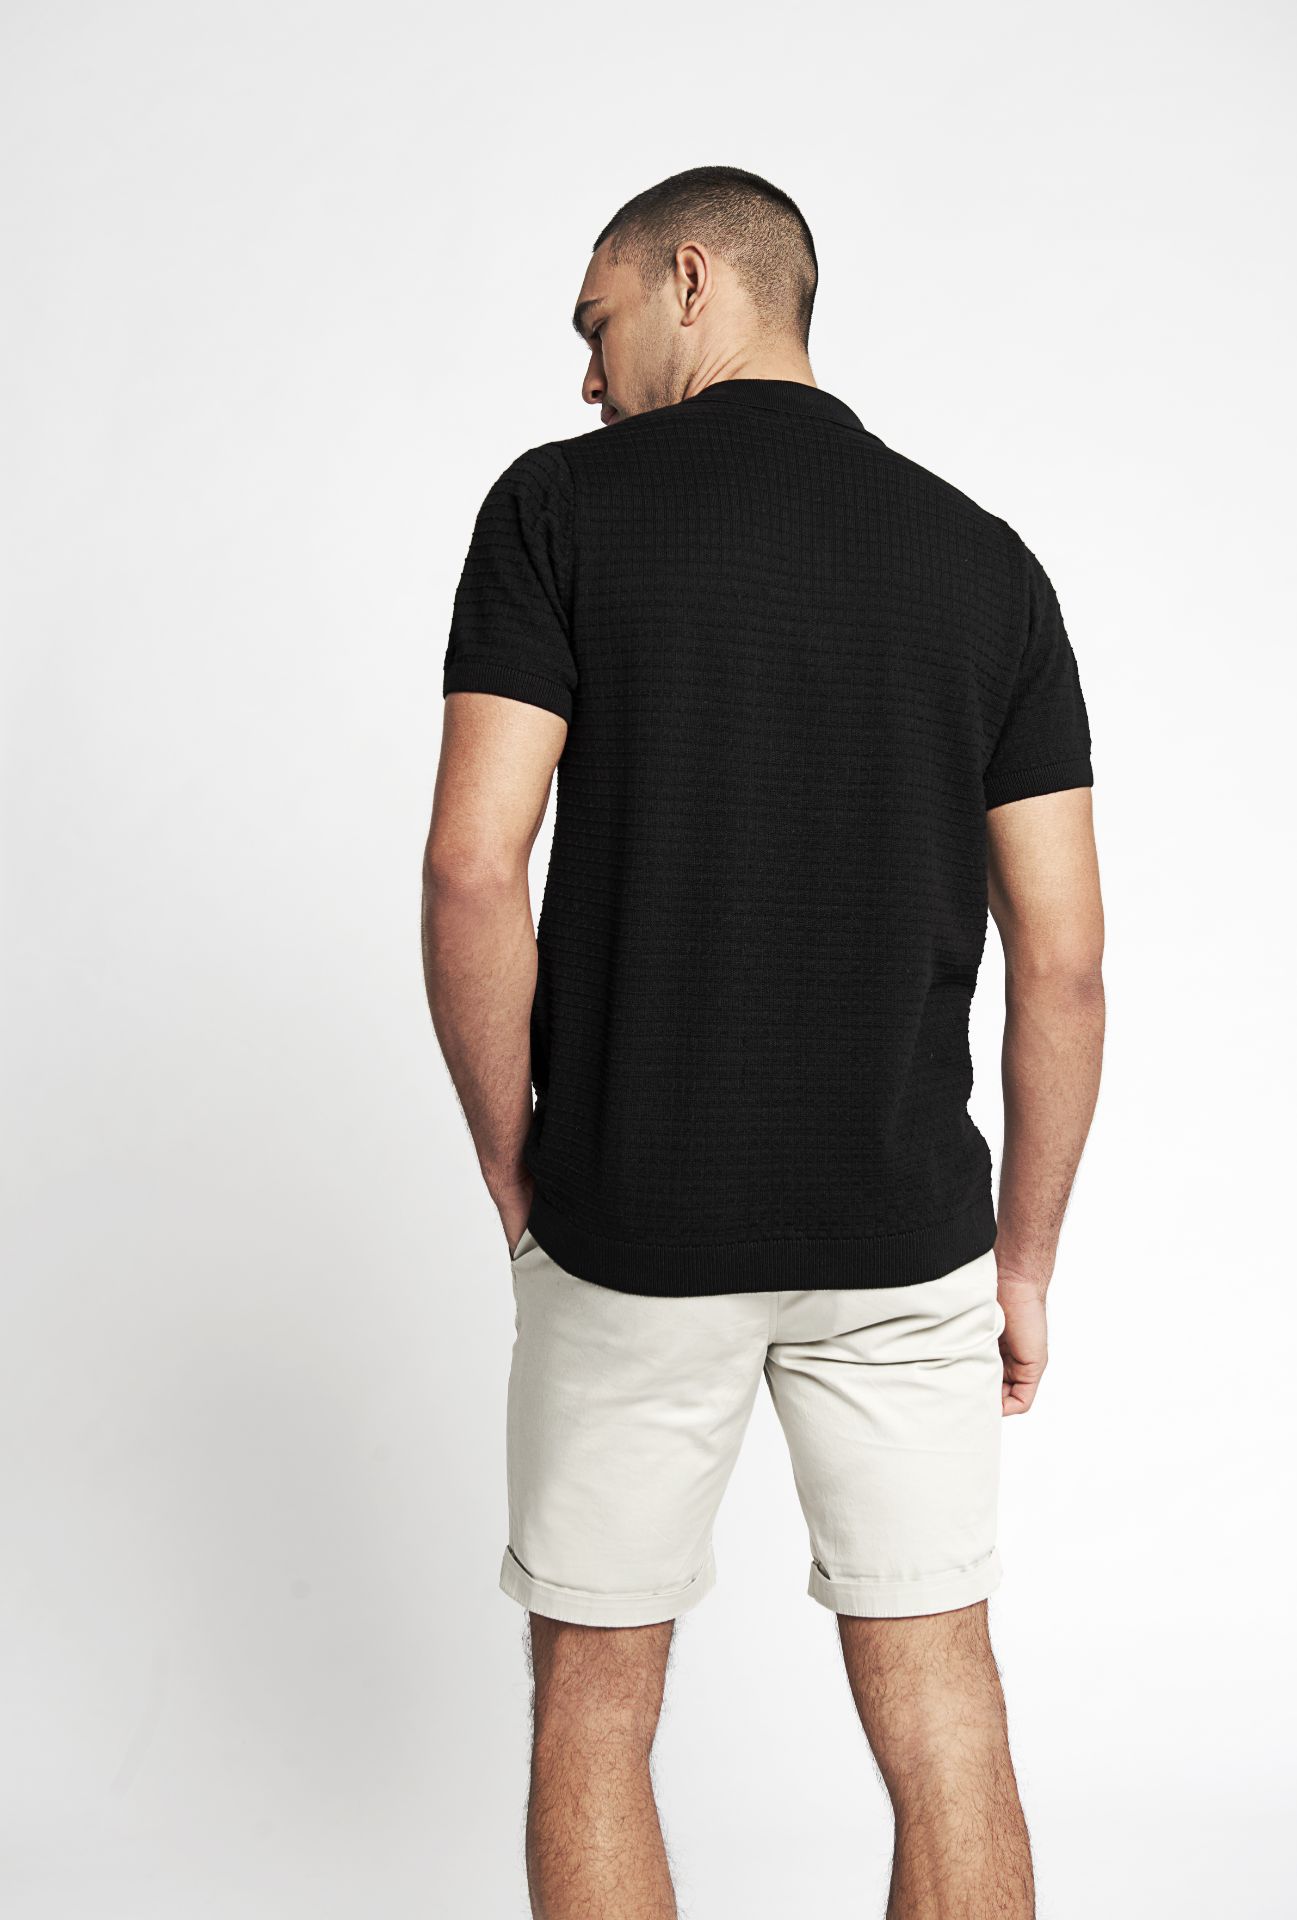 15 x Knitted Zip Polos - Image 6 of 12